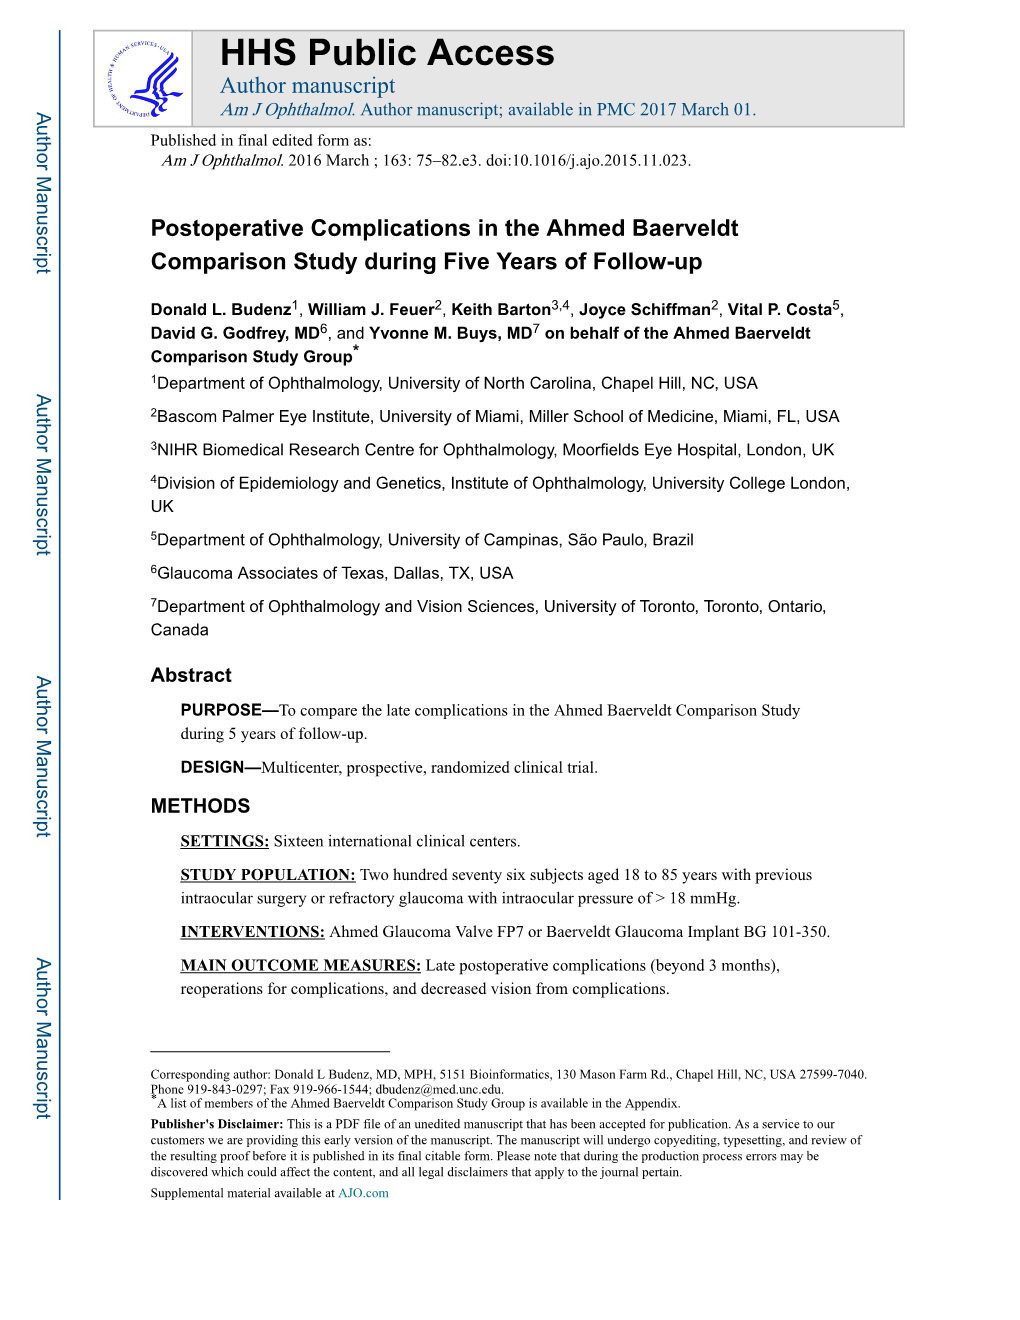 Postoperative Complications in the Ahmed Baerveldt Comparison Study During Five Years of Follow-Up